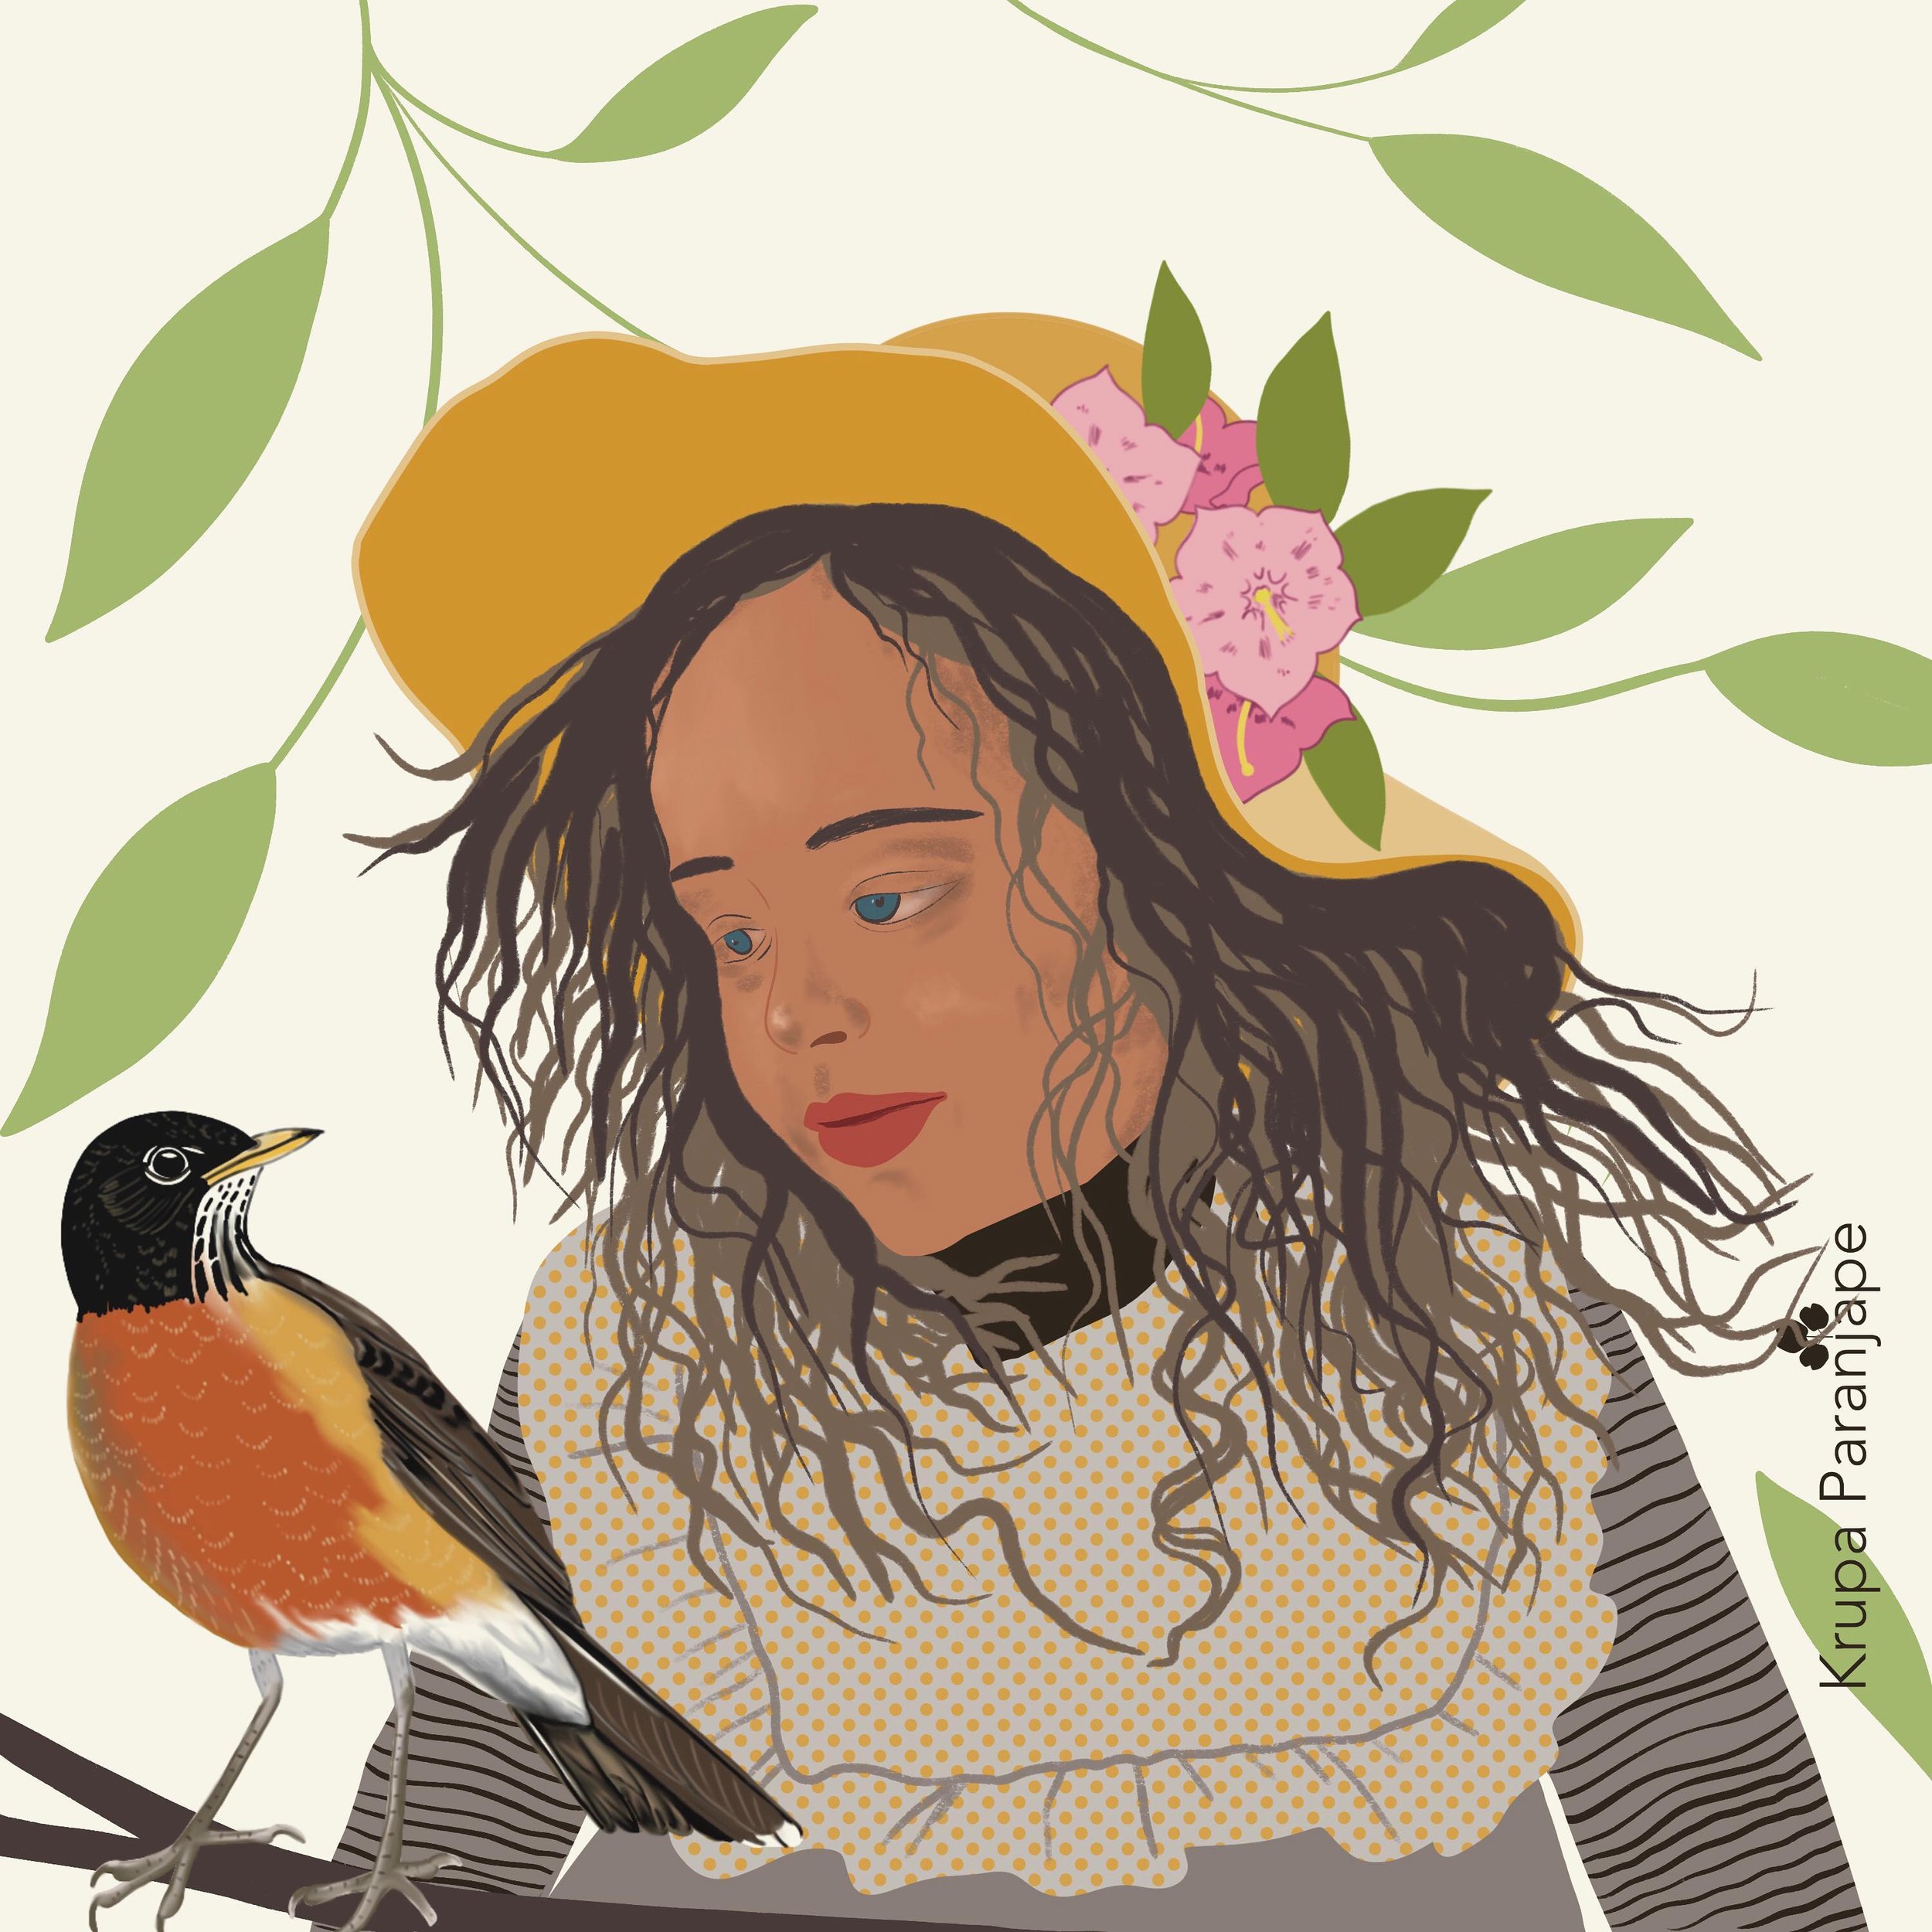 Day 5 #portraitparty hosted by @charlyclements 

Prompt: Pattern, Bird and Curly hair

#curlyhairday #portrait #drawinyourownstyle #charlyclements #drawingchallenge #patternparty